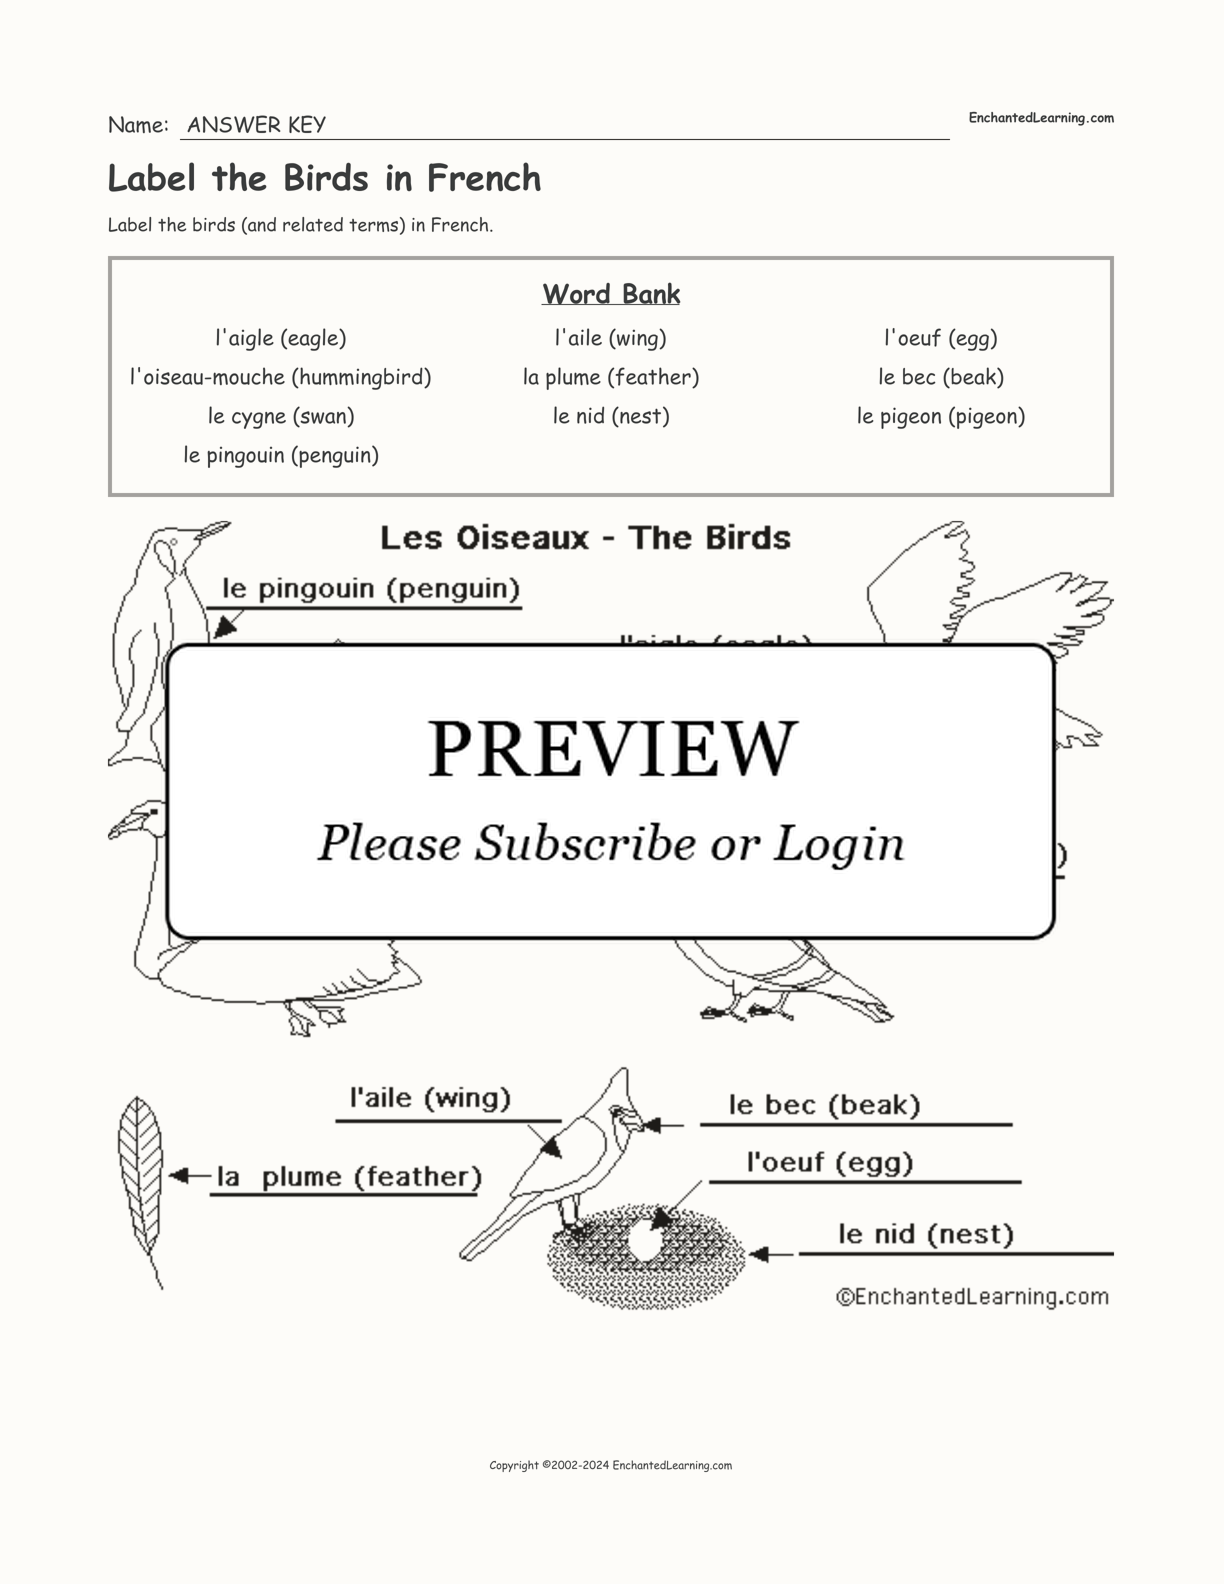 Label the Birds in French interactive worksheet page 2